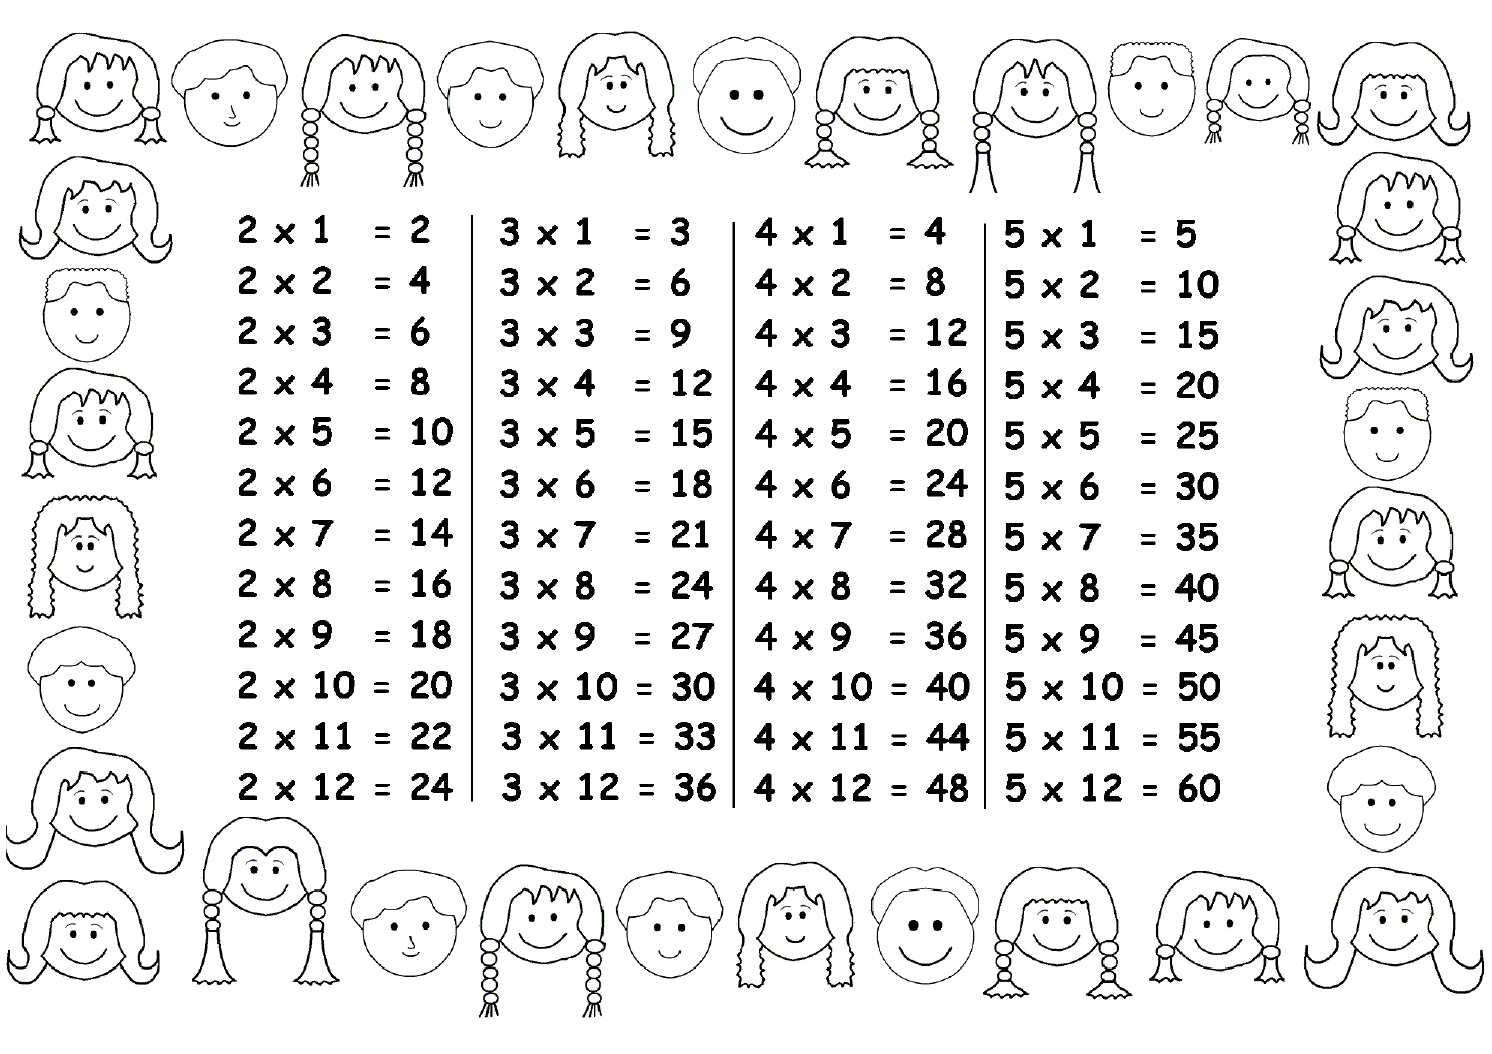 Times Table Chart – 2, 3, 4, 5 / FREE Printable Worksheets ...